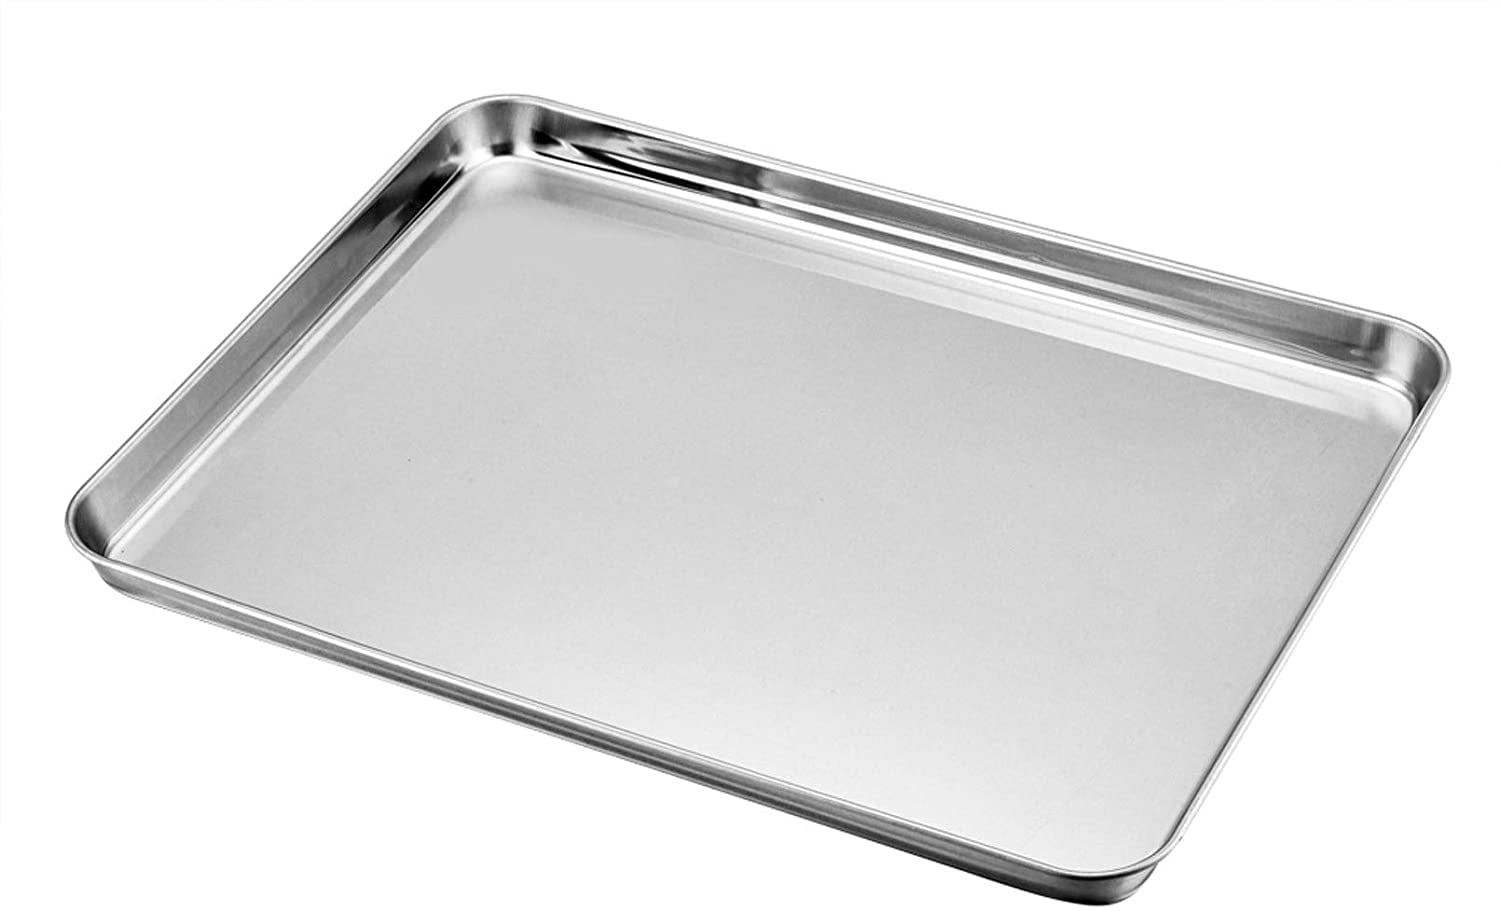 Homikit Baking Cookie Sheet Set of 2, Stainless Steel Cooking Sheets Pan  Tray for Oven, 20 x 14 Large Metal Half Sheet for Cooking Baking, Rustproof  